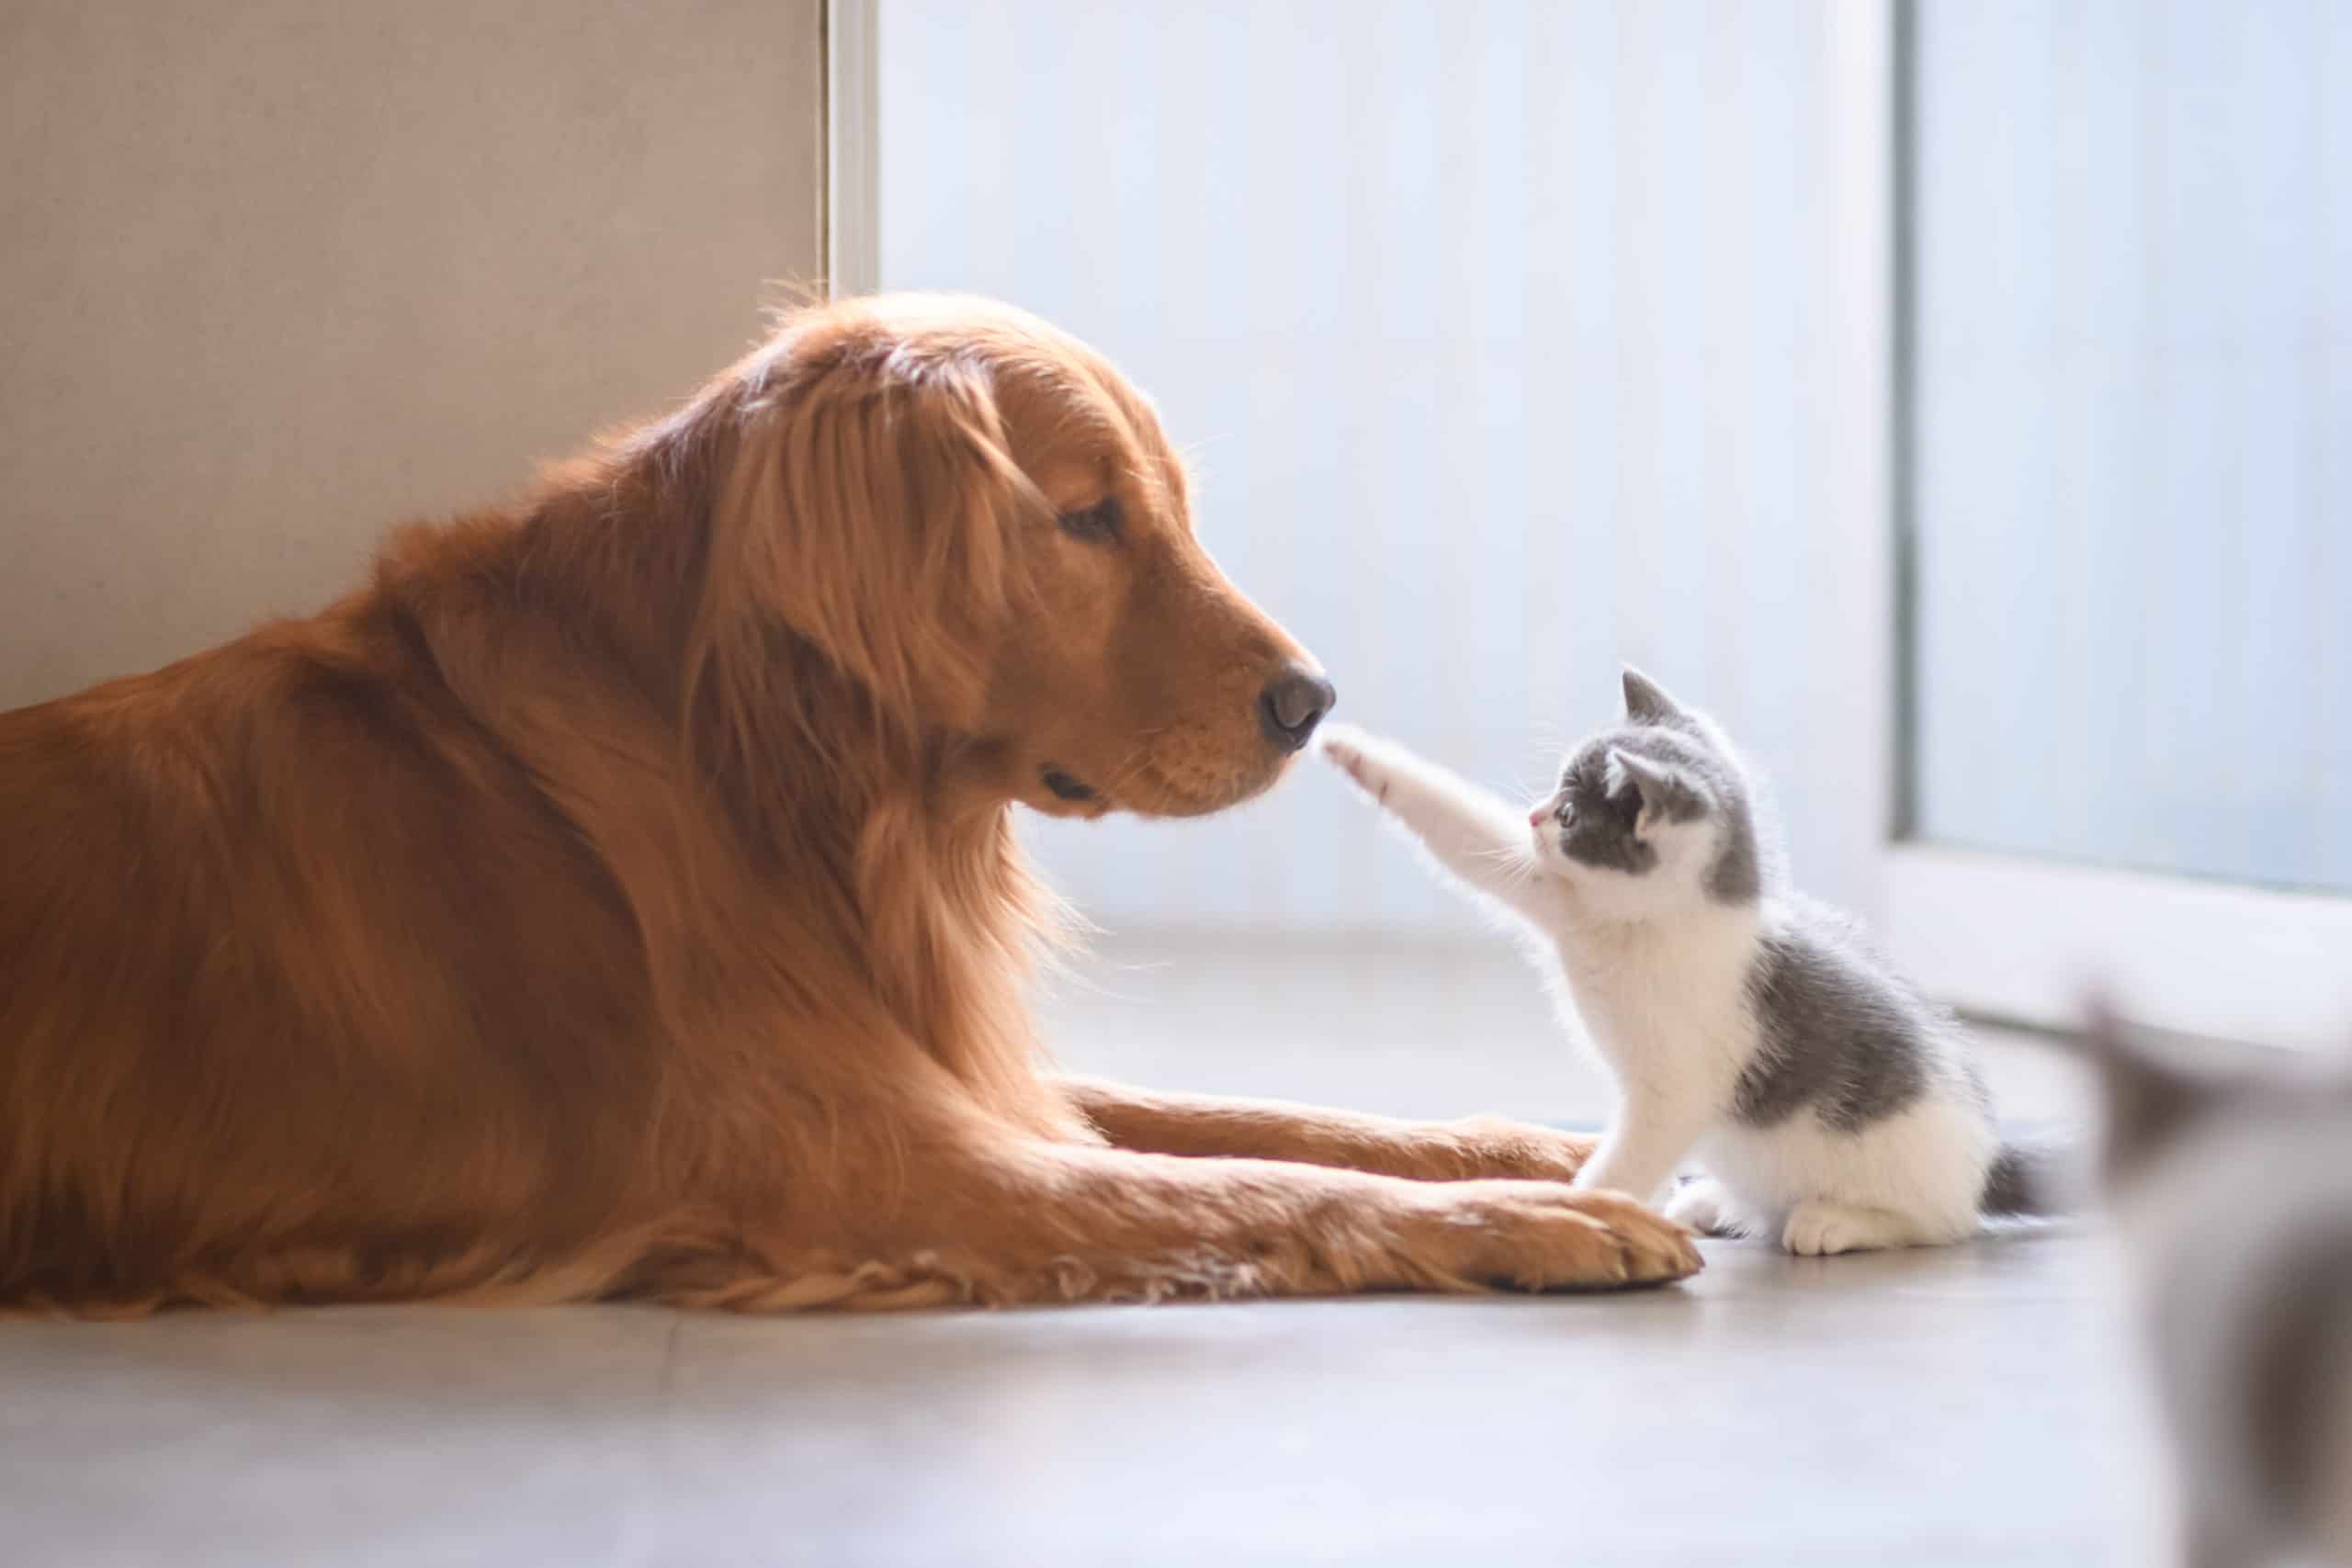 Why does my dog lick my kitten?